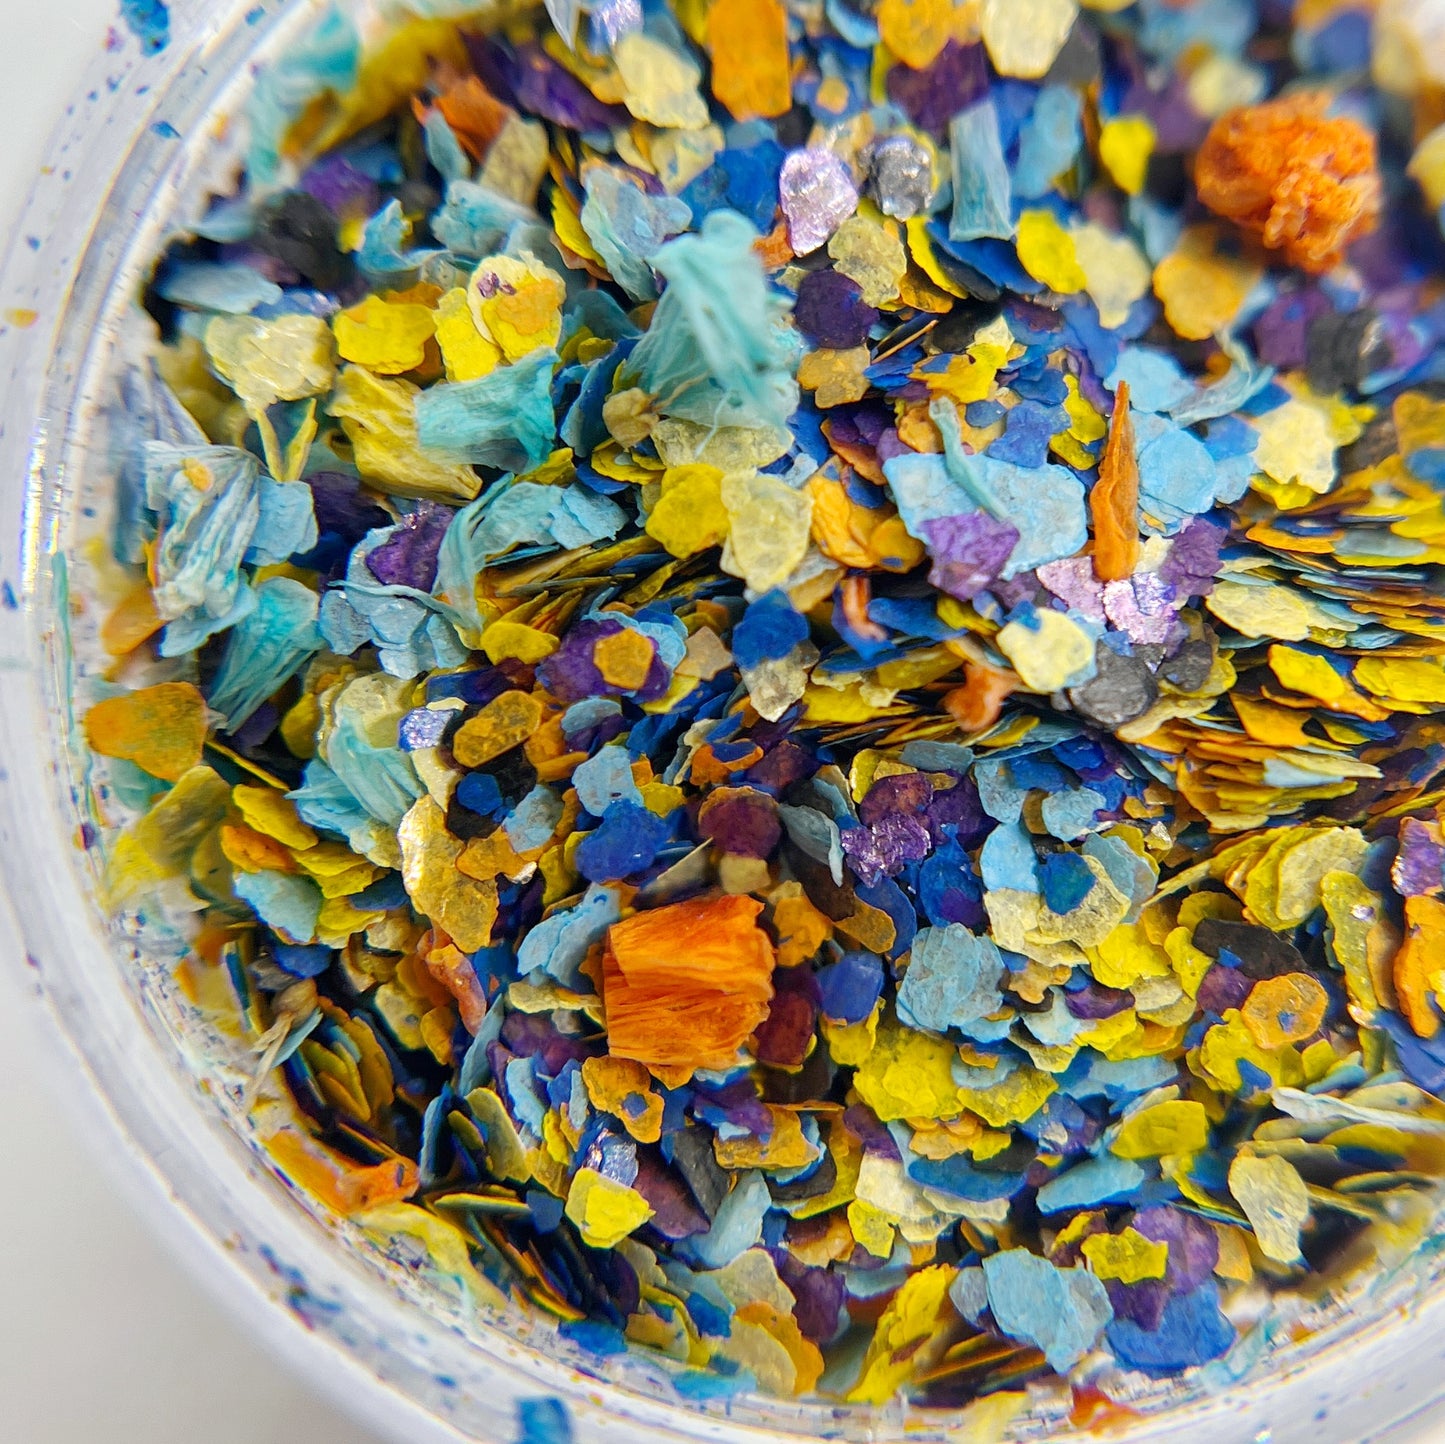 Confetti Crush Collection in Azure Crush- Colorful Mix of Mica Speckles and Dried Flower Petals in Jar, Featuring Blue, Yellow, Orange and Purple on White Backgroud. 